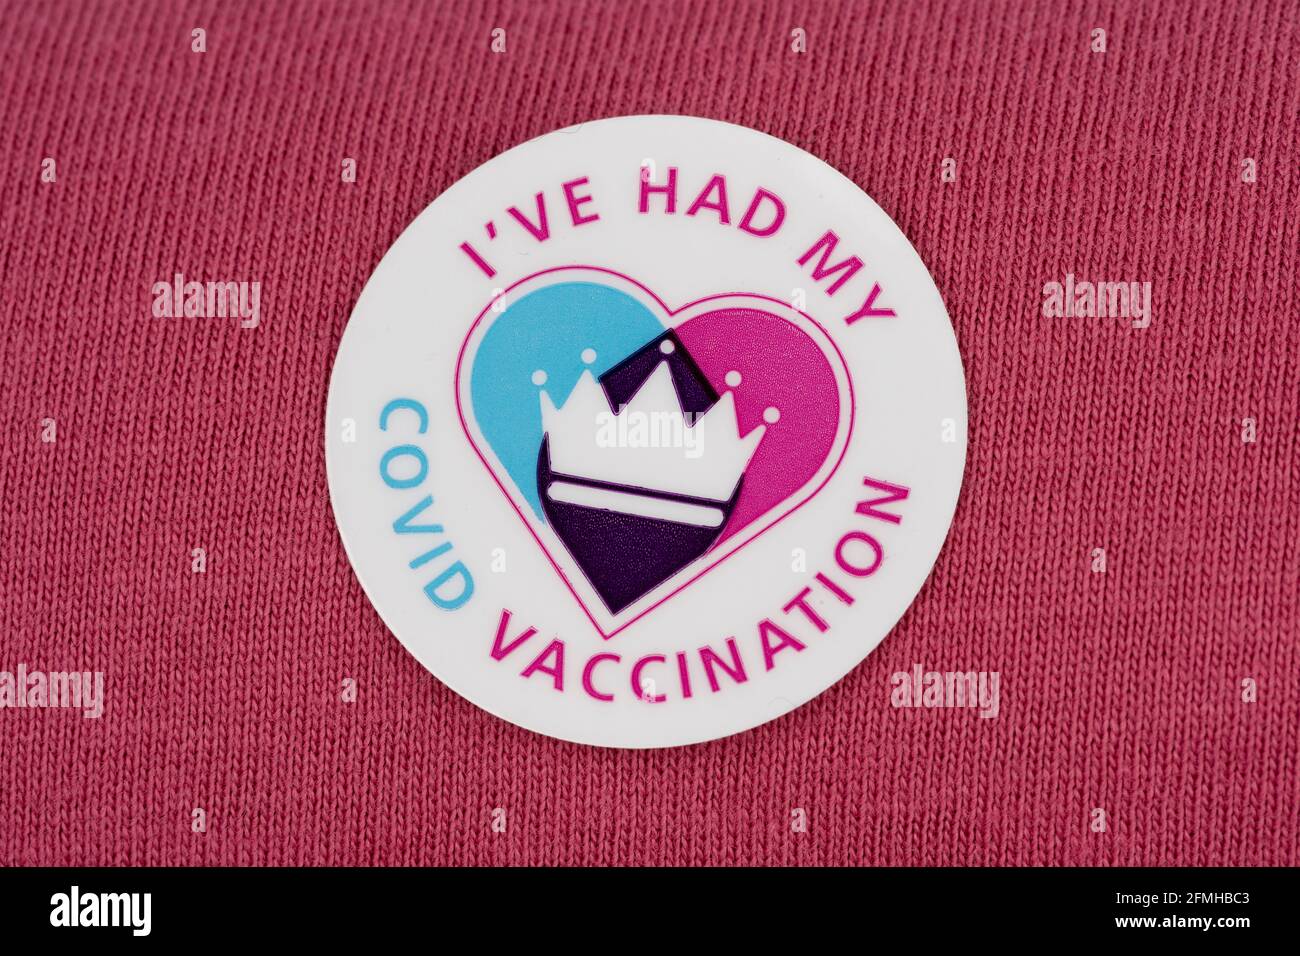 I badge that reads 'I've had my covid vaccination' shot on a person's clothing. Stock Photo